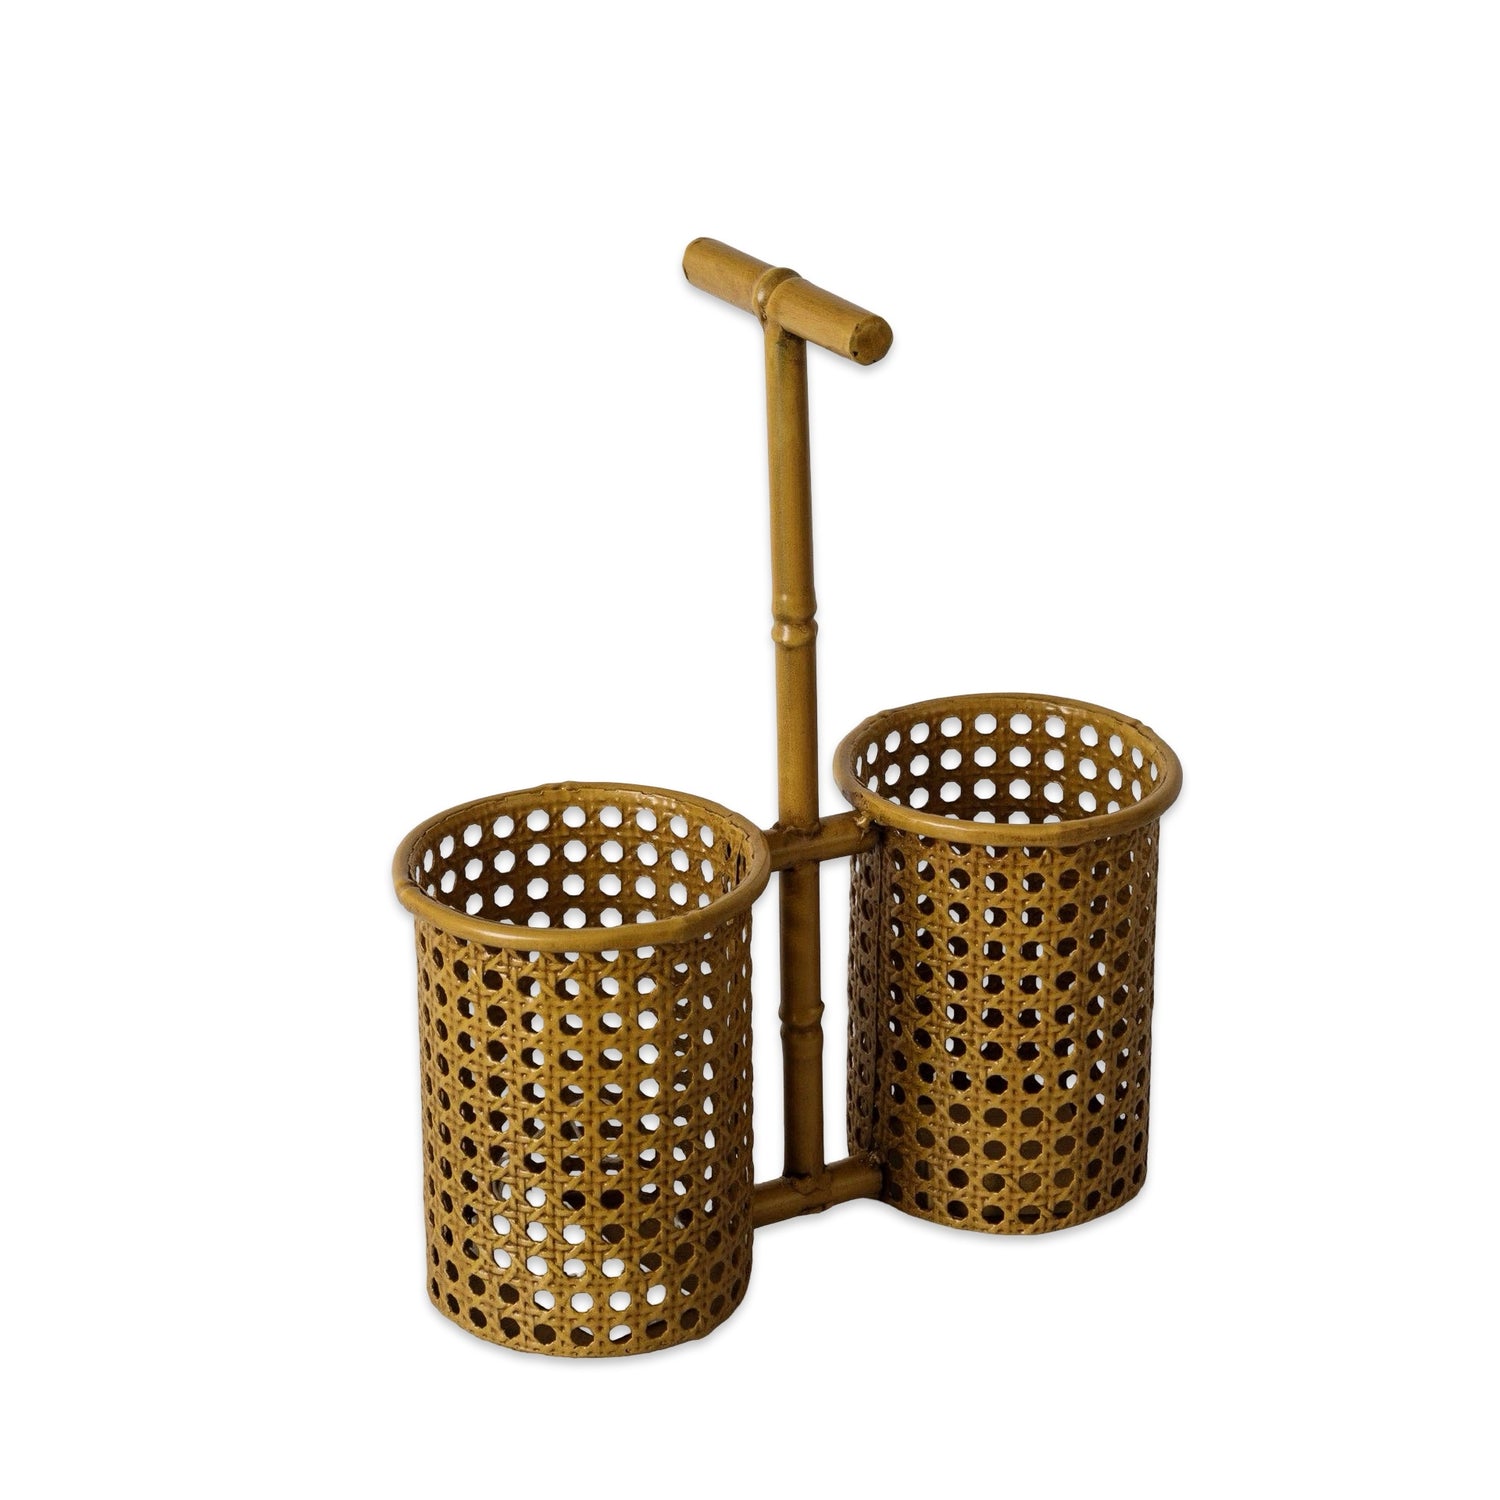 Faux Caning And Bamboo Utensil Holder